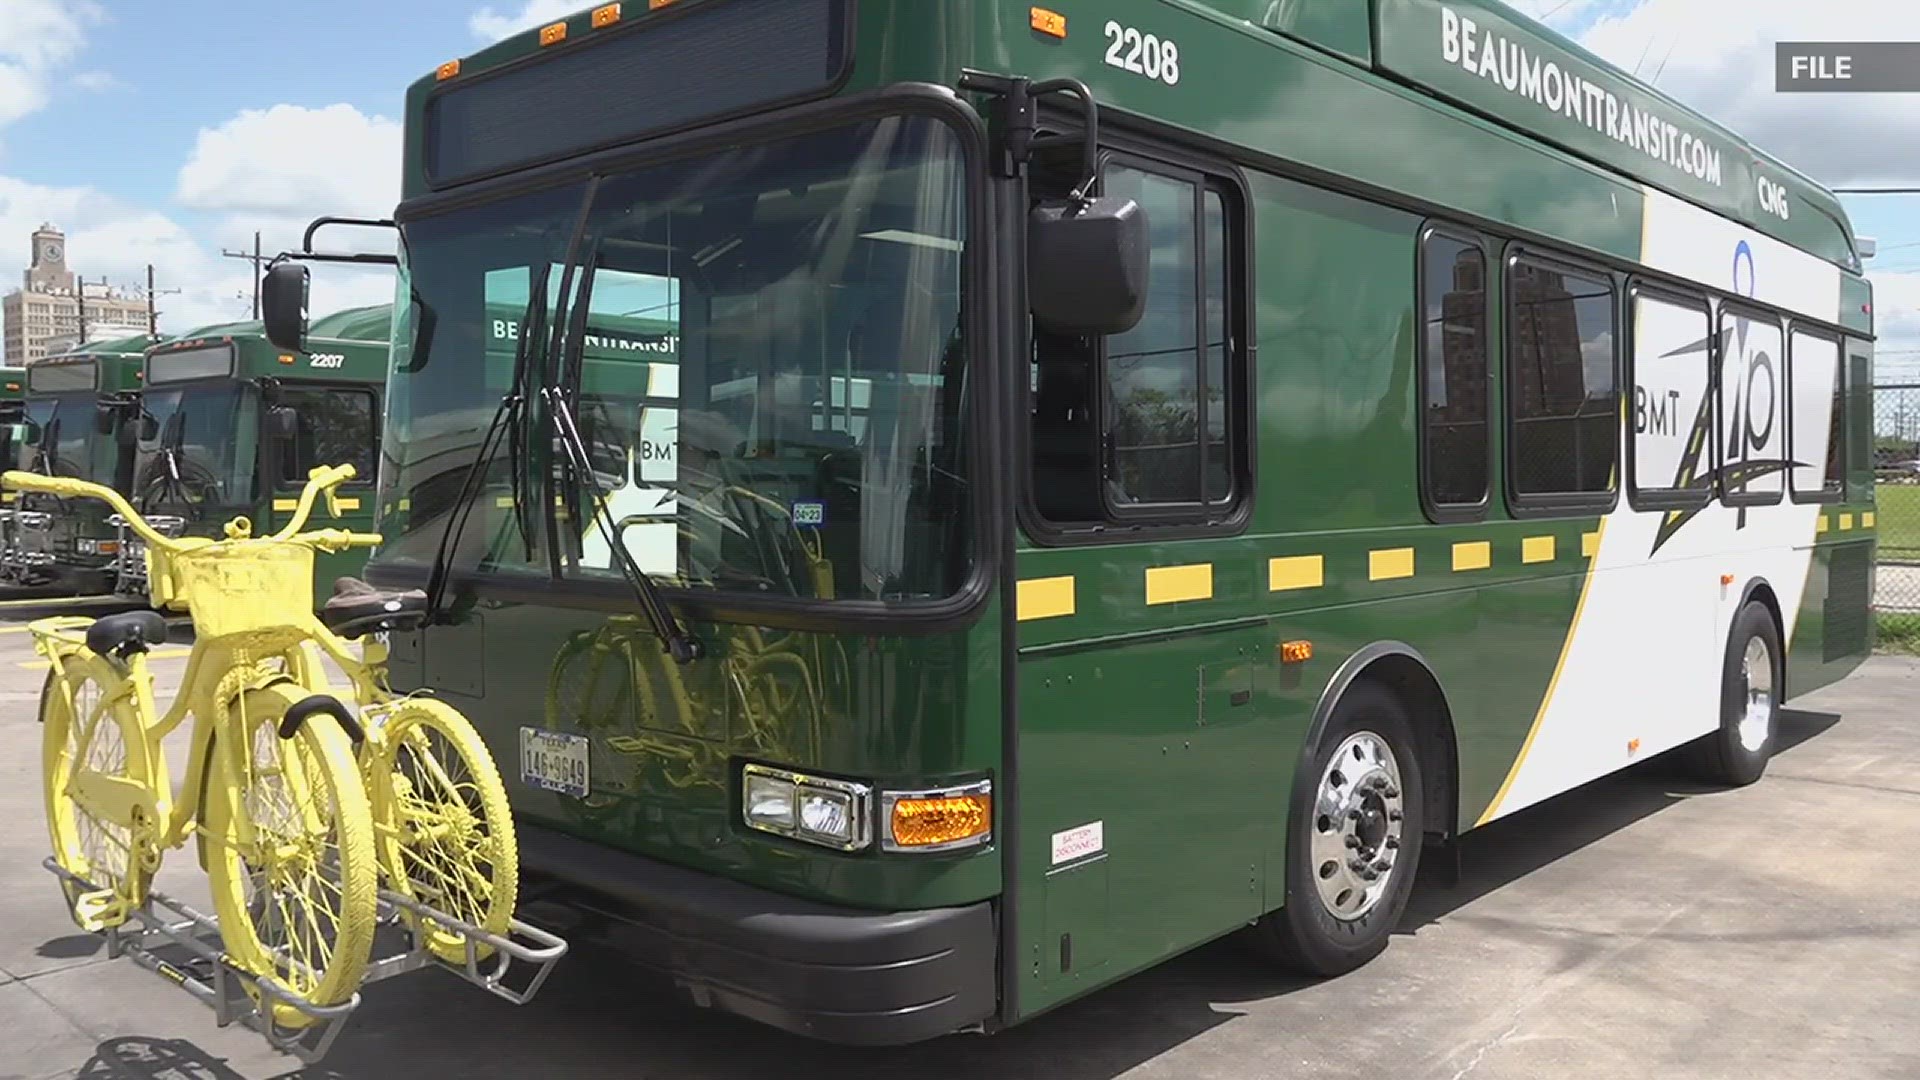 The City of Beaumont will be kicking in nearly $100,000 for each bus with a total contribution of $499,022.